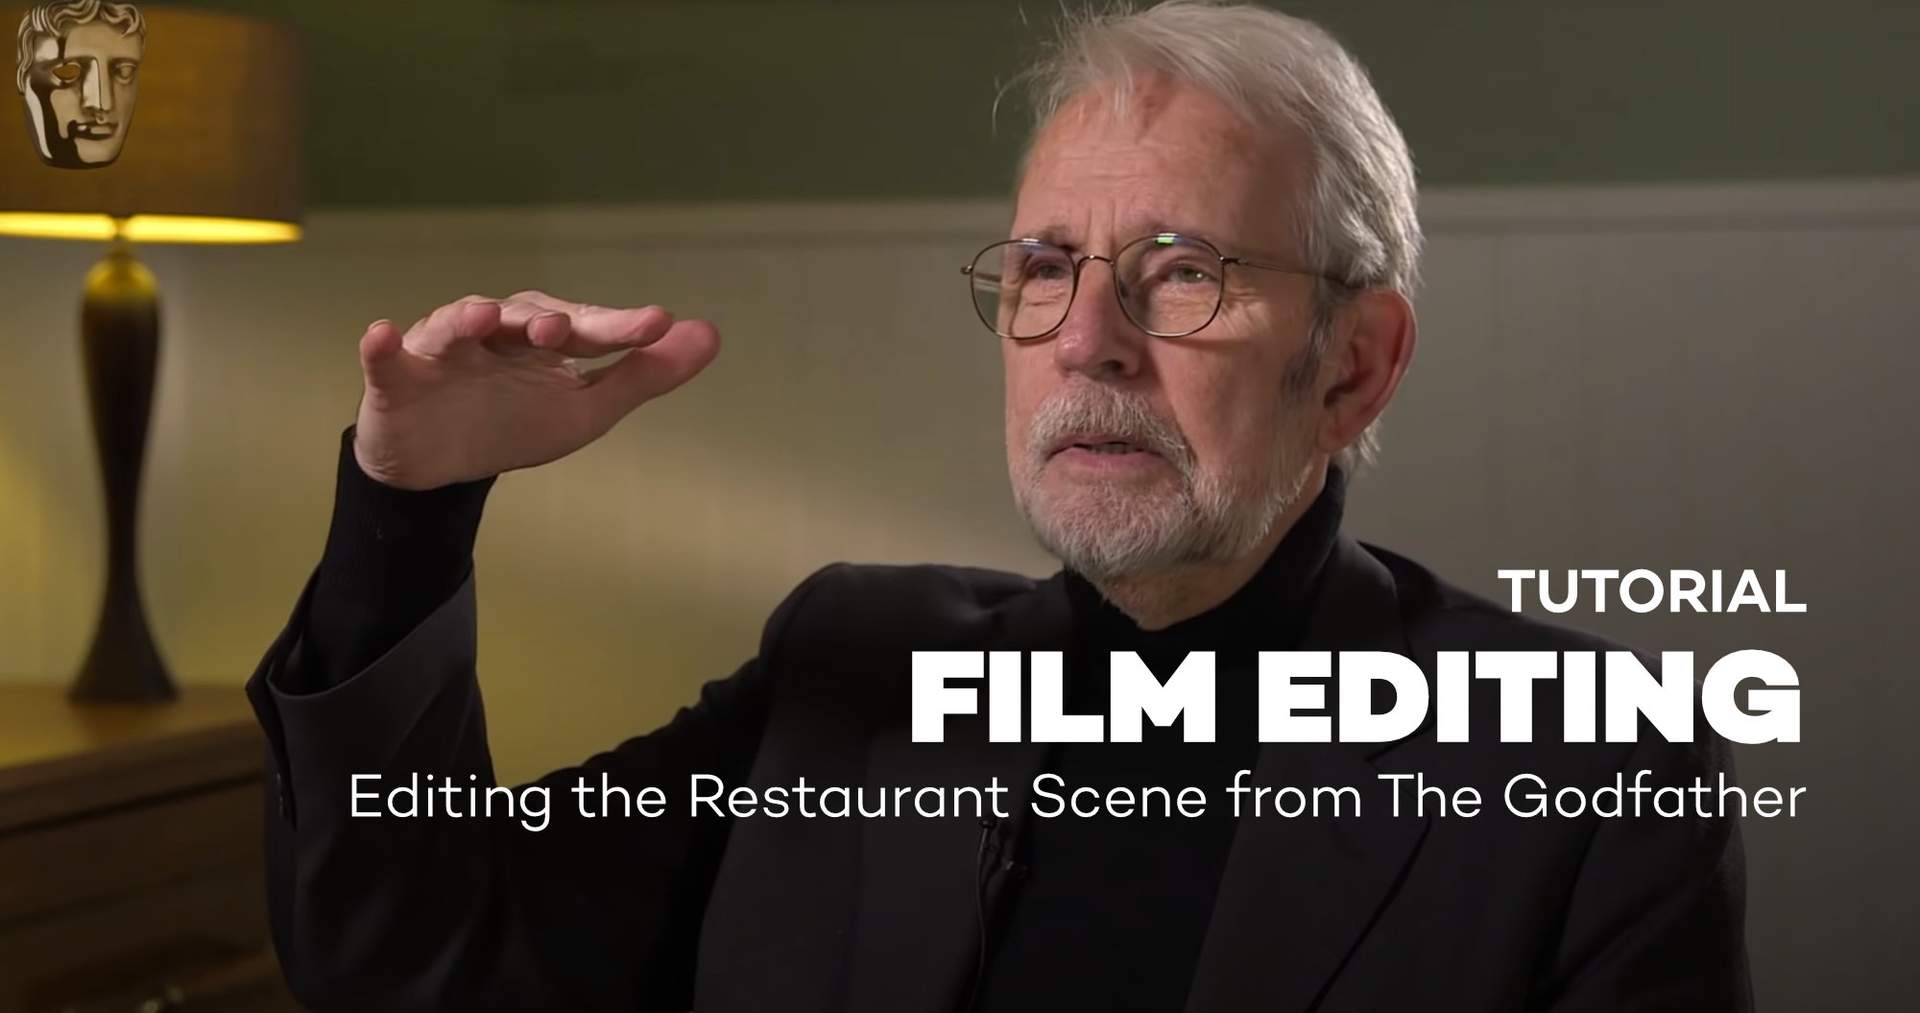 Walter Murch on Editing the Restaurant Scene from The Godfather